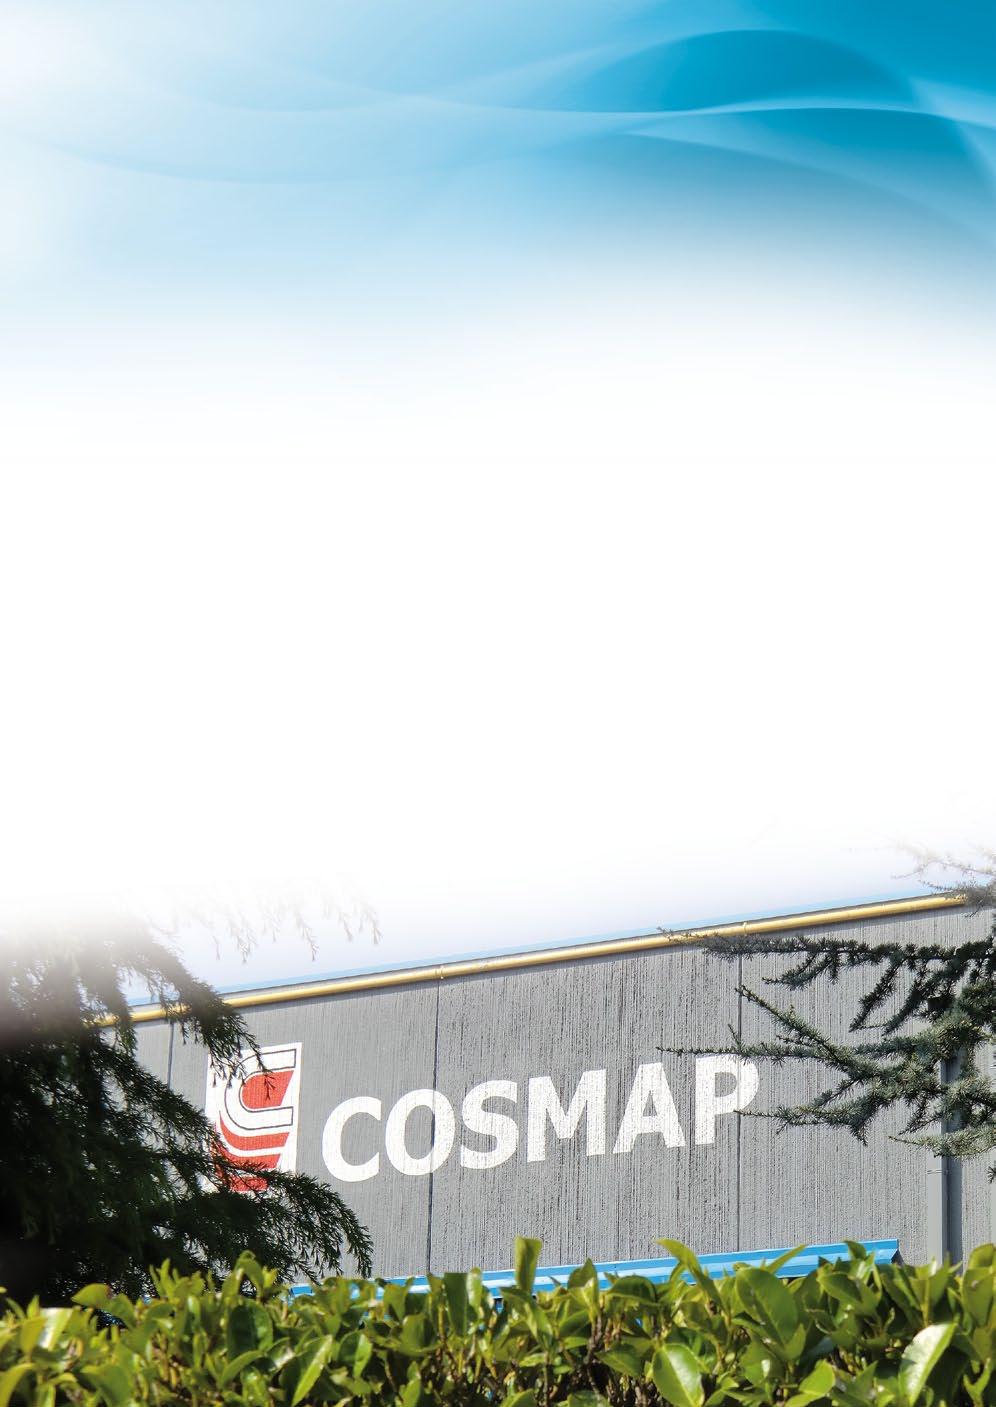 www.cosmapsrl.it Grinding and polishing automatic machines for metallic surfaces Born in Padua, Italy in the late 70s, C.O.S.M.A.P. s.r.l. produces automatic machines for grinding and polishing metallic surfaces.